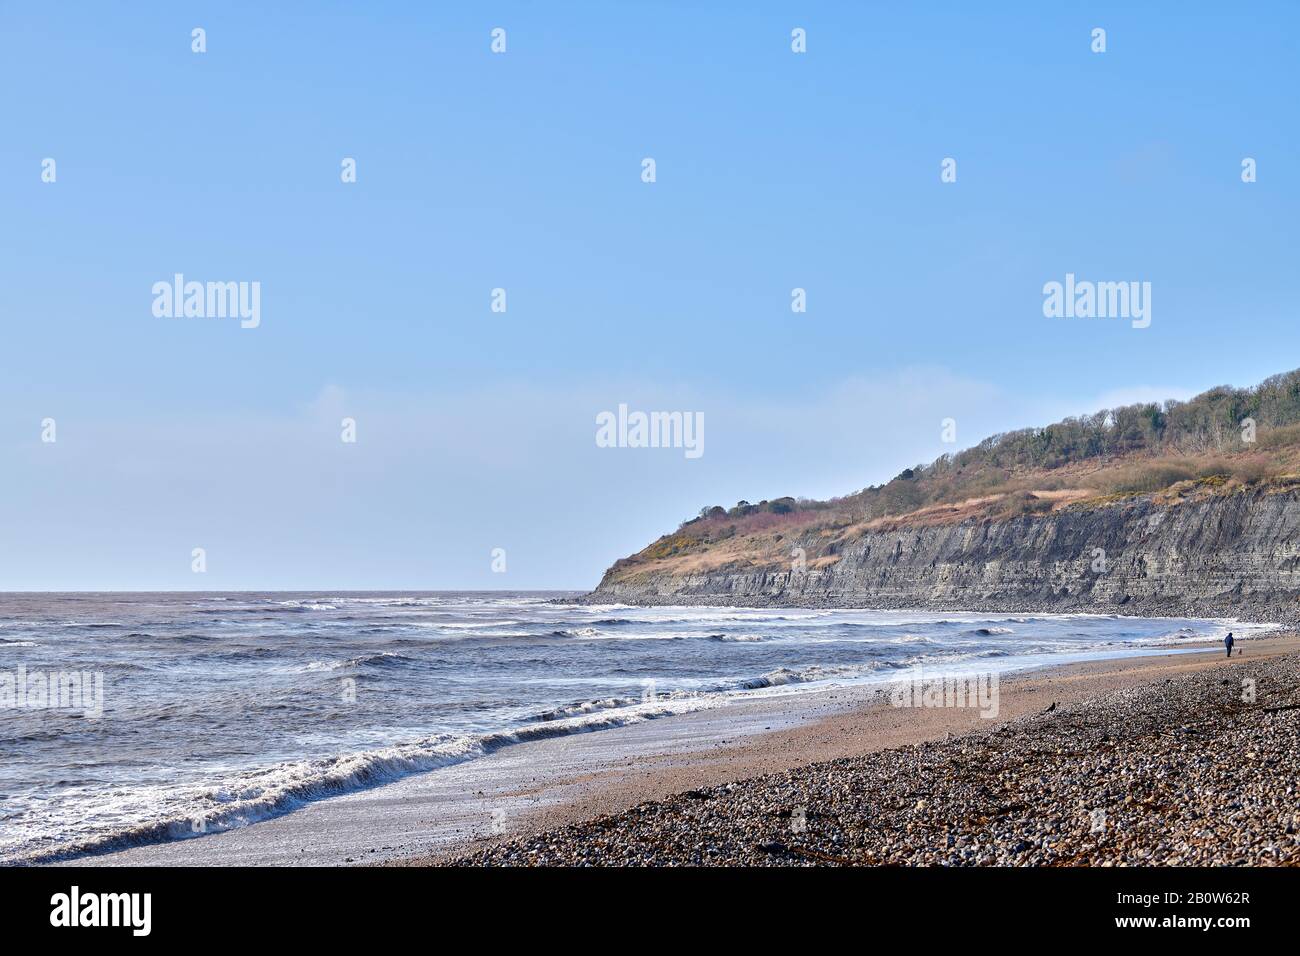 Waves from the English Channel break on the shingle beach of Lyme Bay, Lyme Regis, Dorset, England with the cliffs of the Heritage (Jurassic) Coast, a Stock Photo